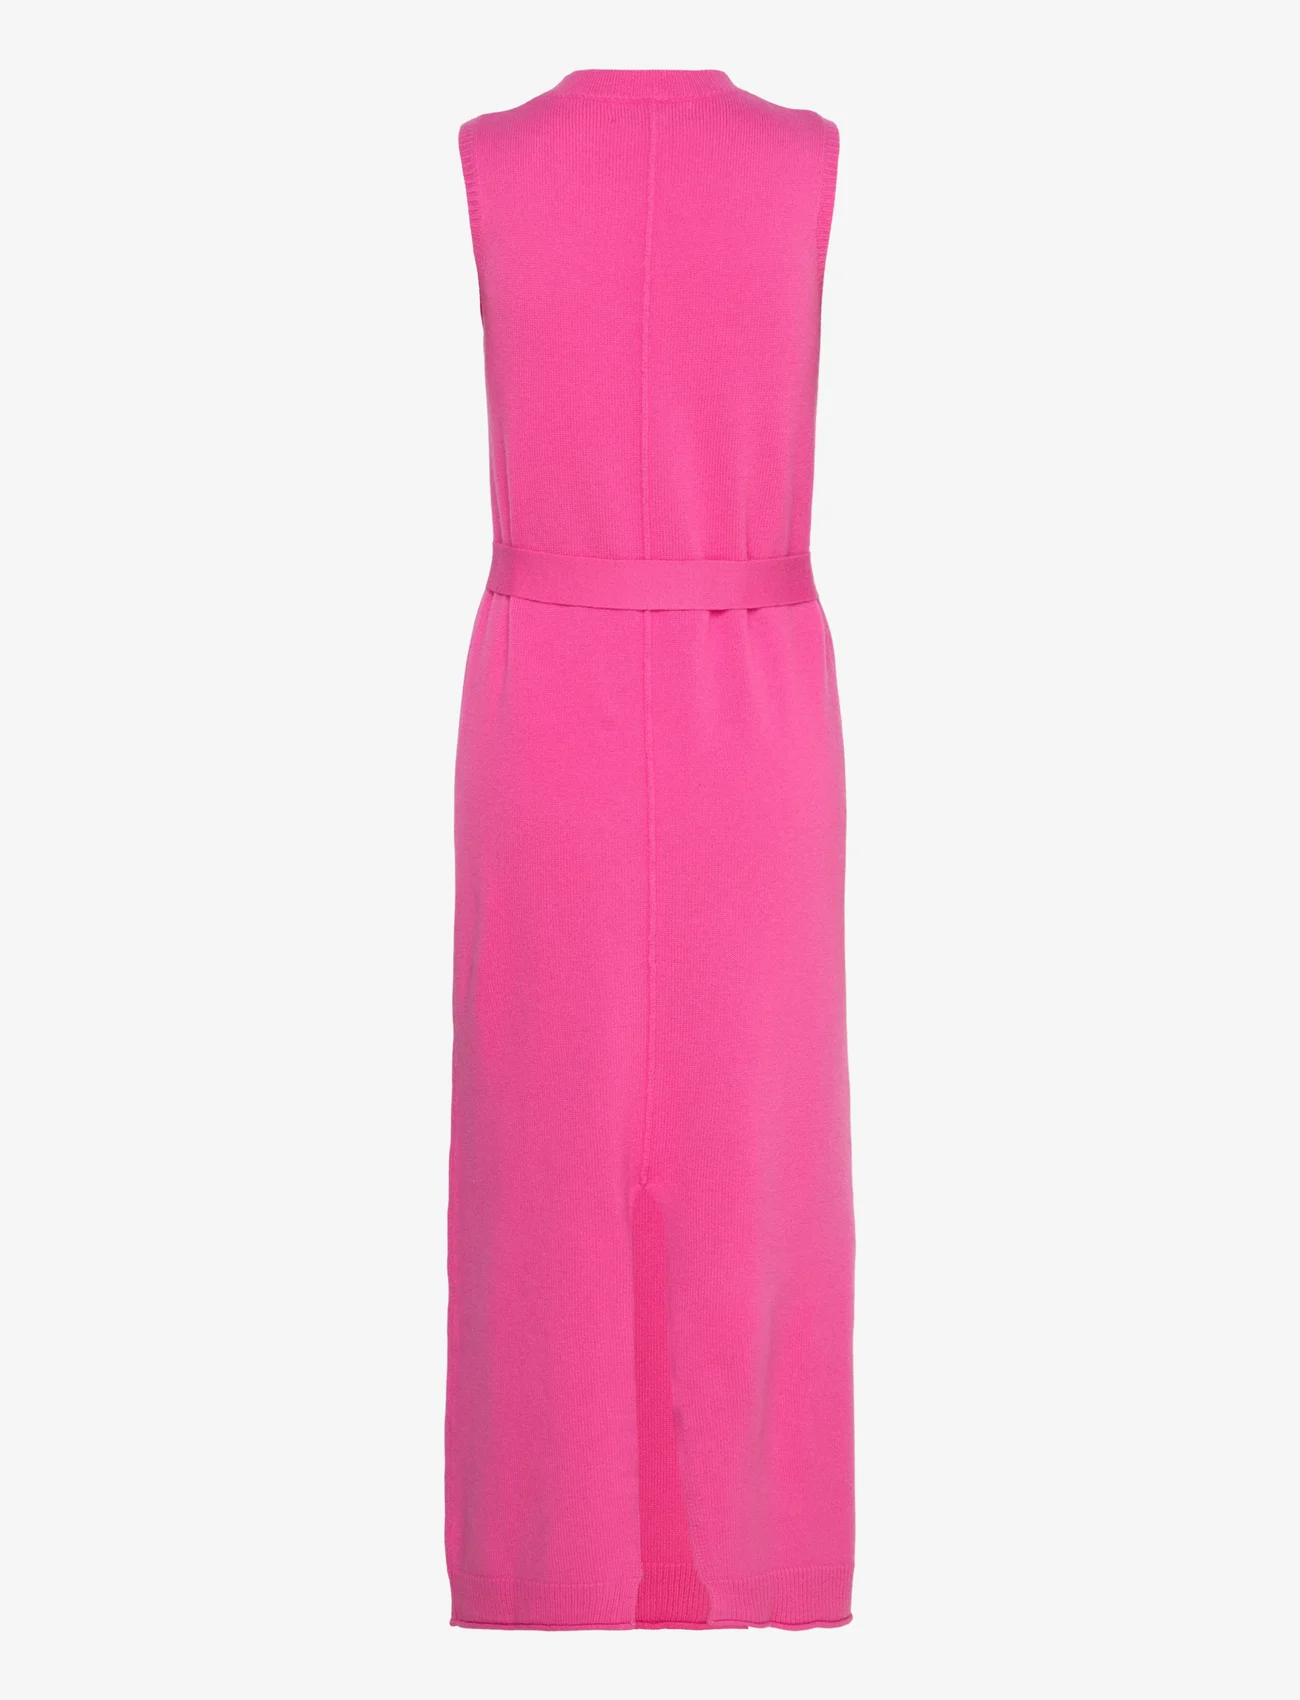 Love Lolita - Bibi maxi dress - party wear at outlet prices - pink - 1